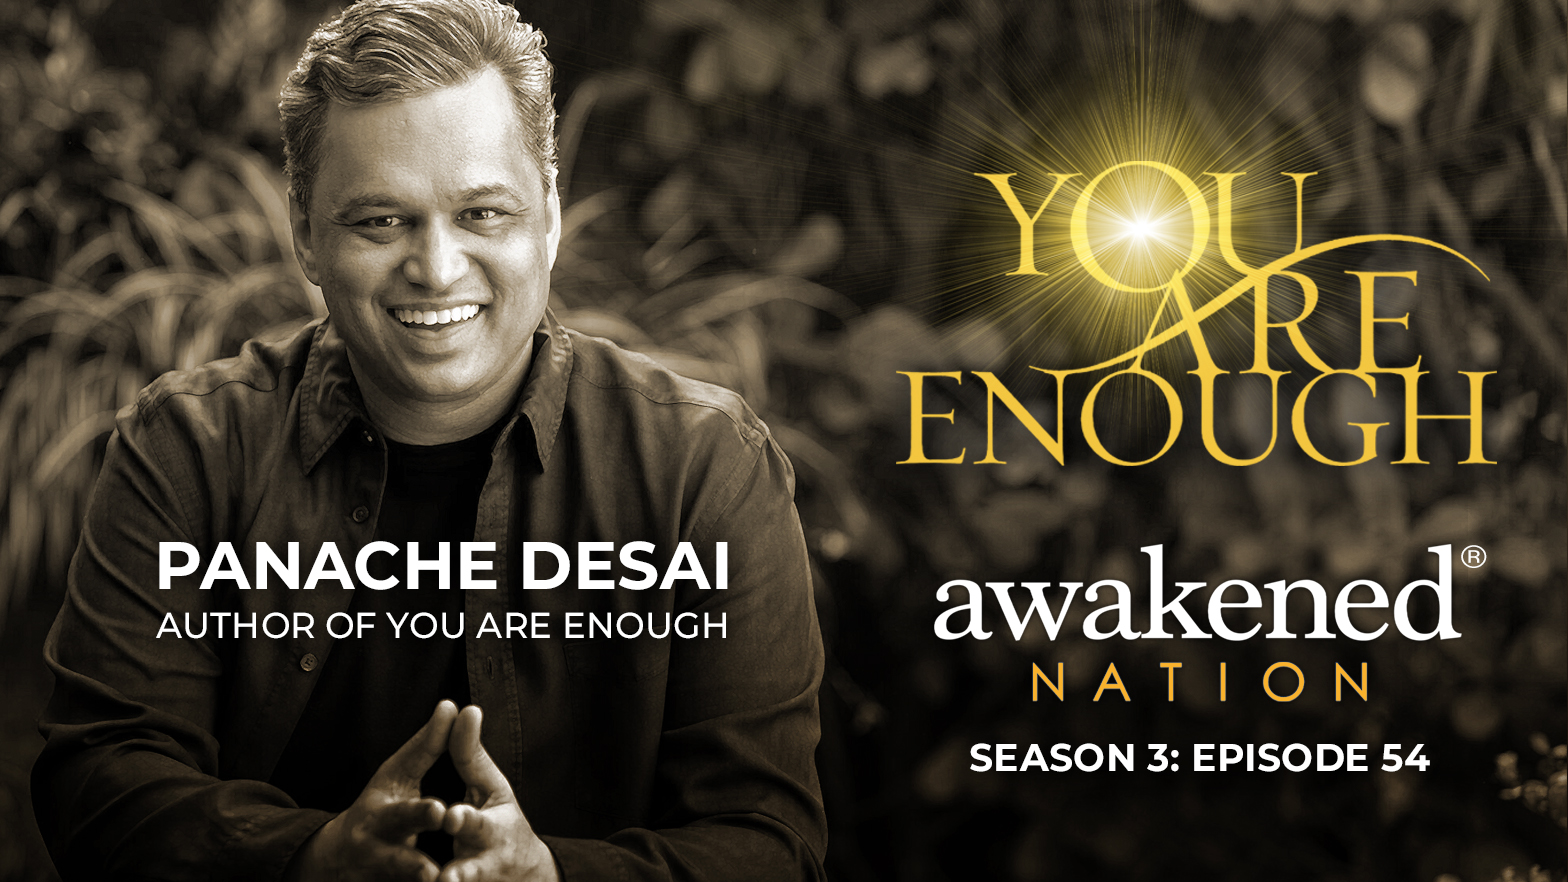 You Are Enough, an interview with Panache Desai